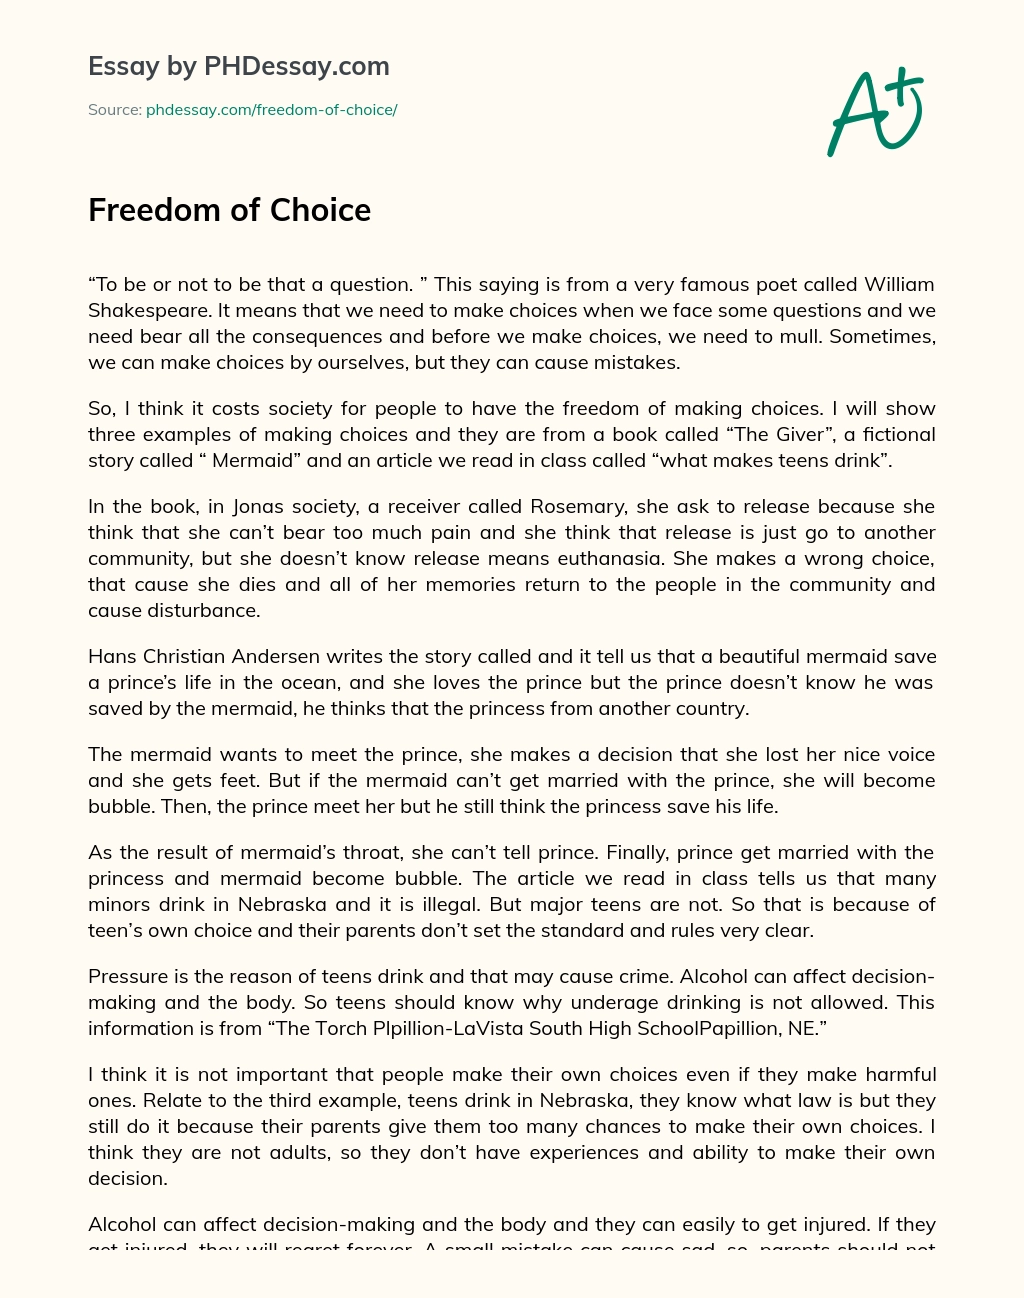 choices in life essay